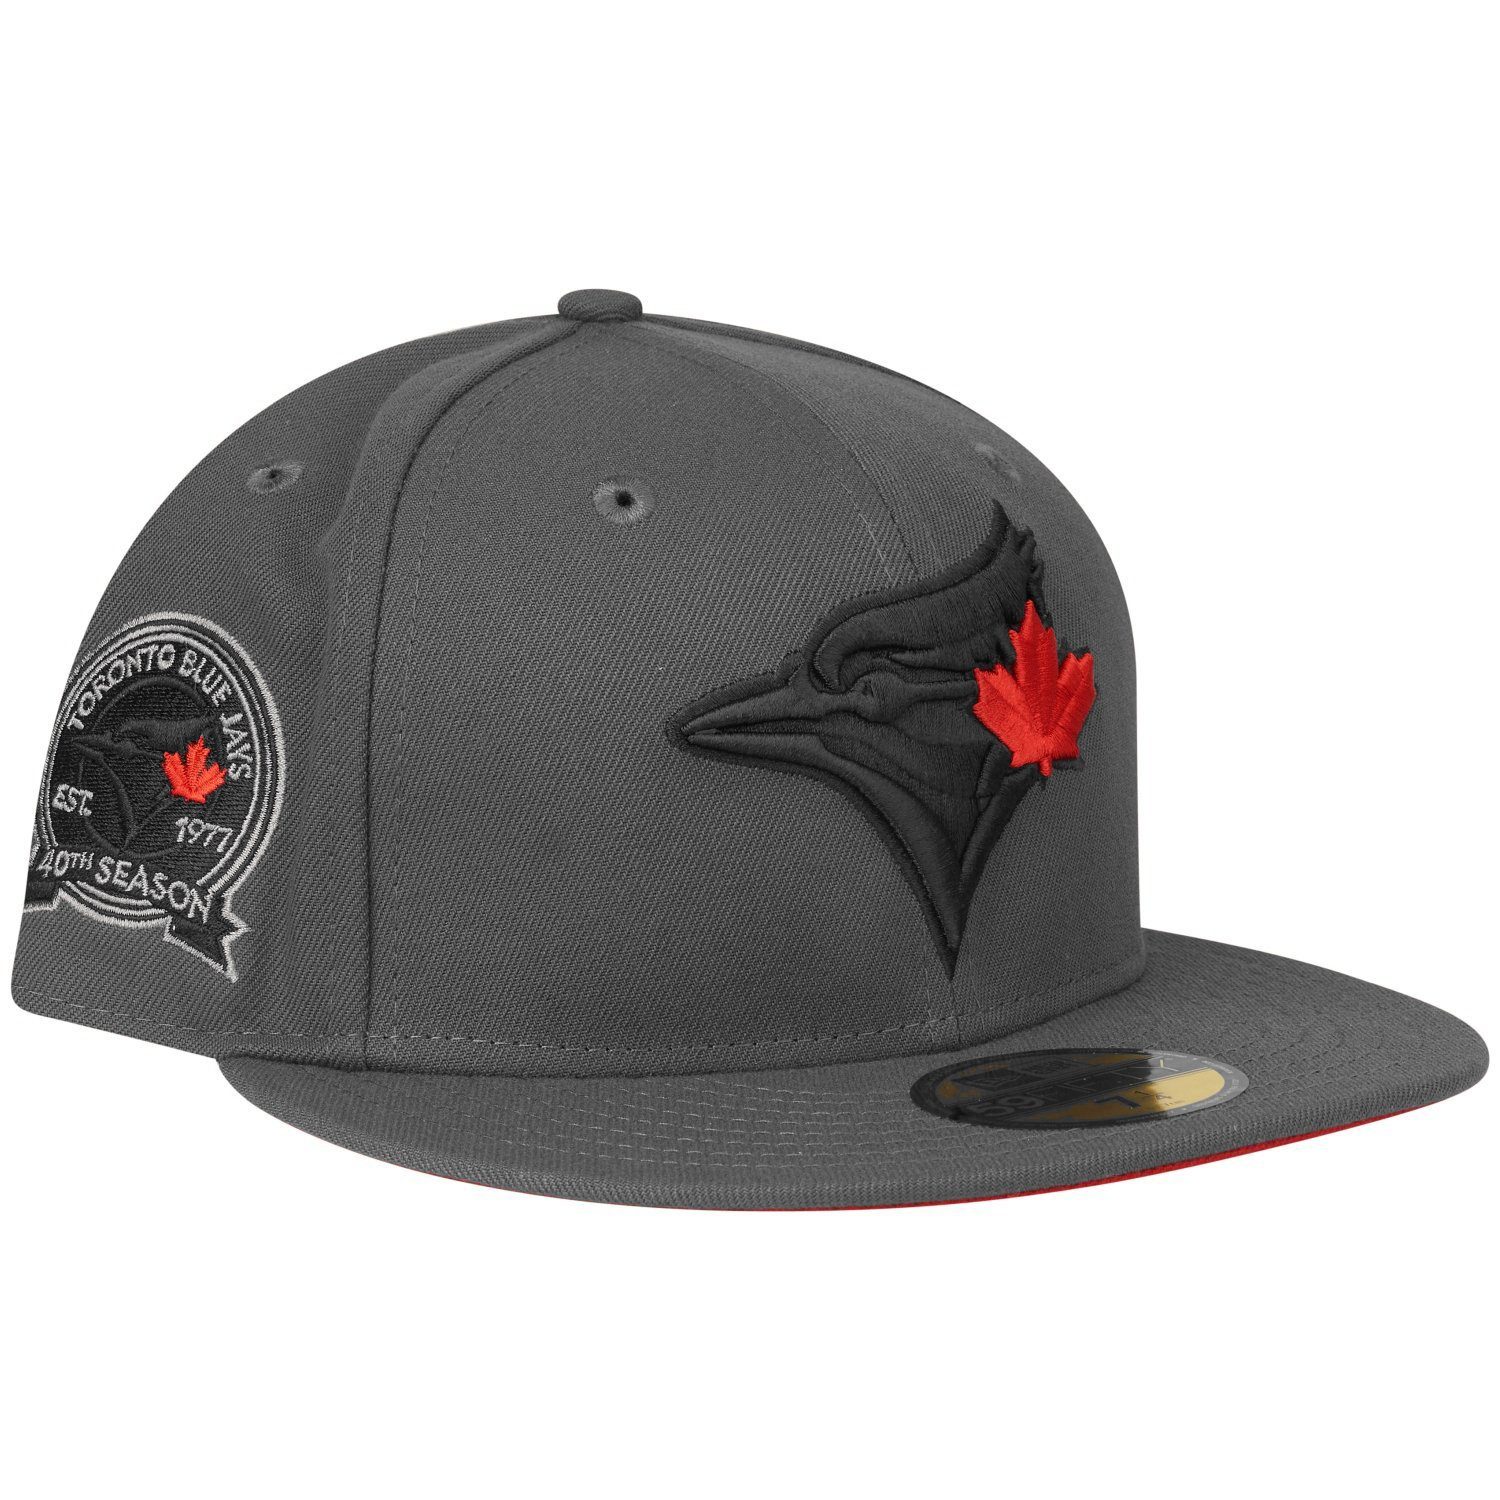 New Era Fitted Cap Jays Toronto MLB 59Fifty 40th